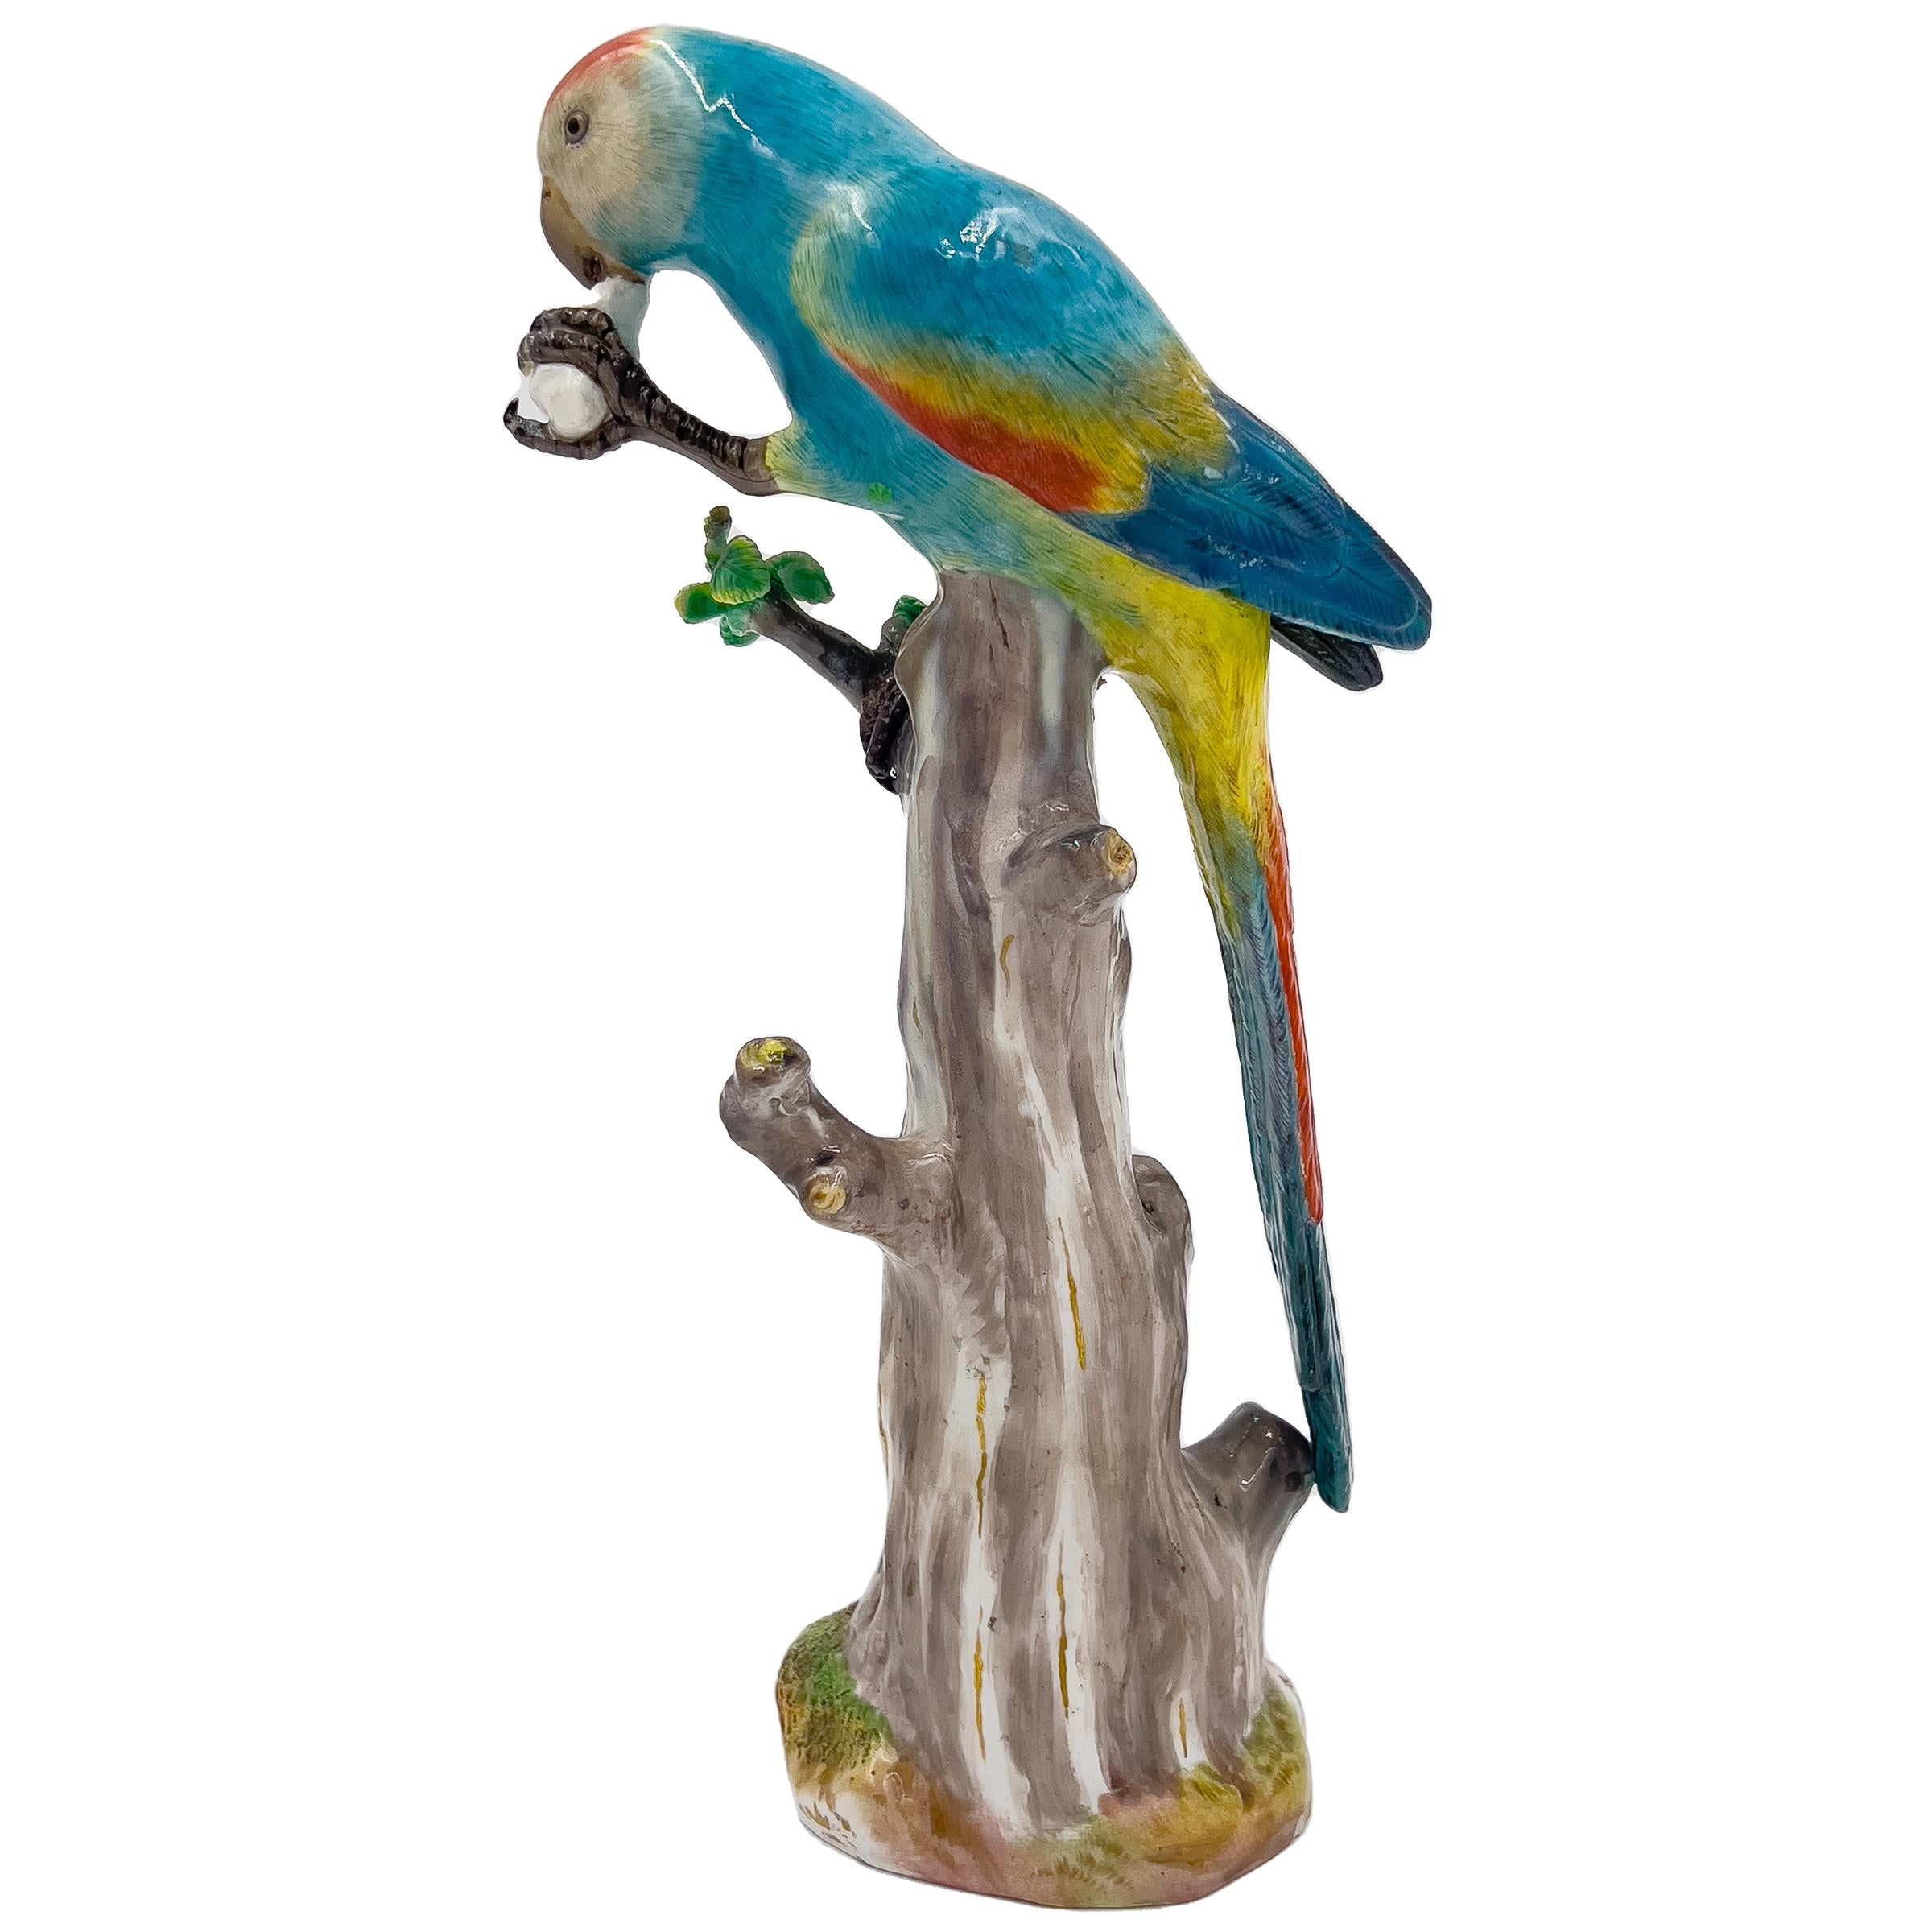 This exquisite Meissen animal figurine from the 19th century features a vibrant, multi-colored parrot perched on top of a tree stump while enjoying its meal. The craftsmanship is evident in the intricate details of the figurine, capturing the beauty